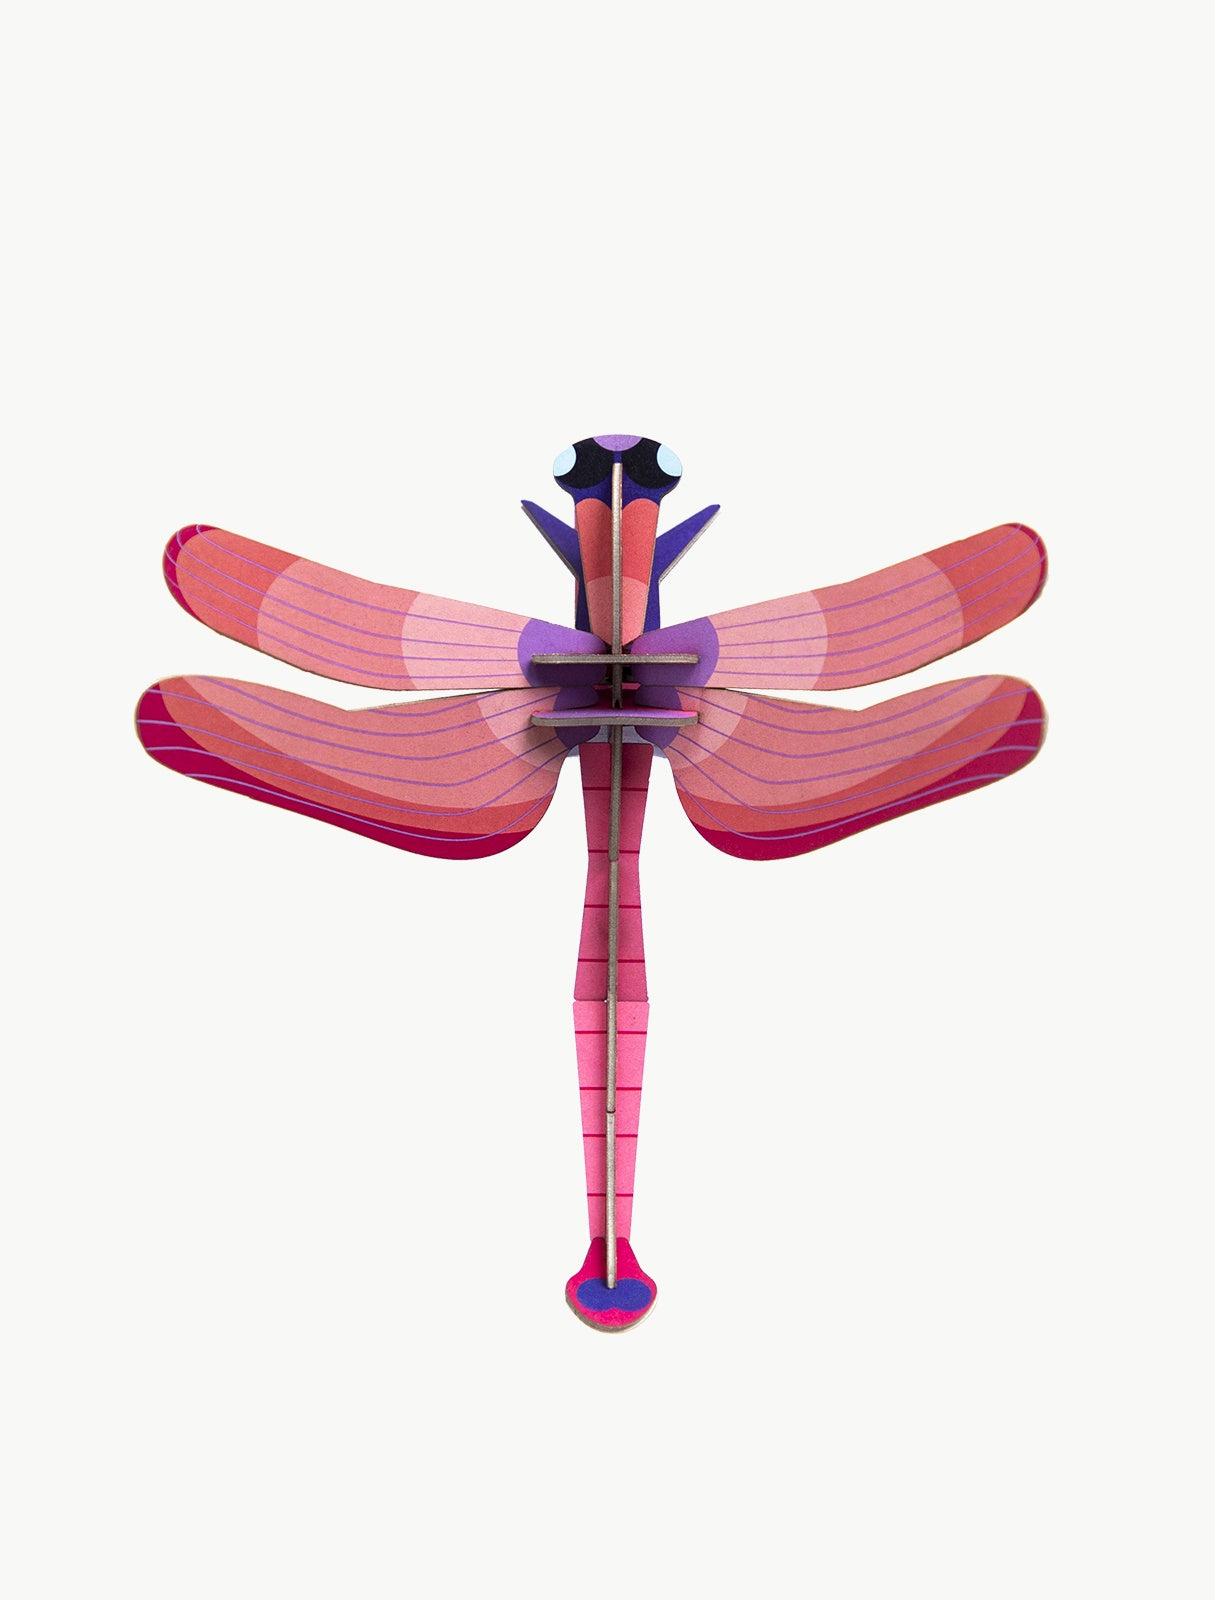 Studio Roof Wall Decor - Ruby Dragonfly